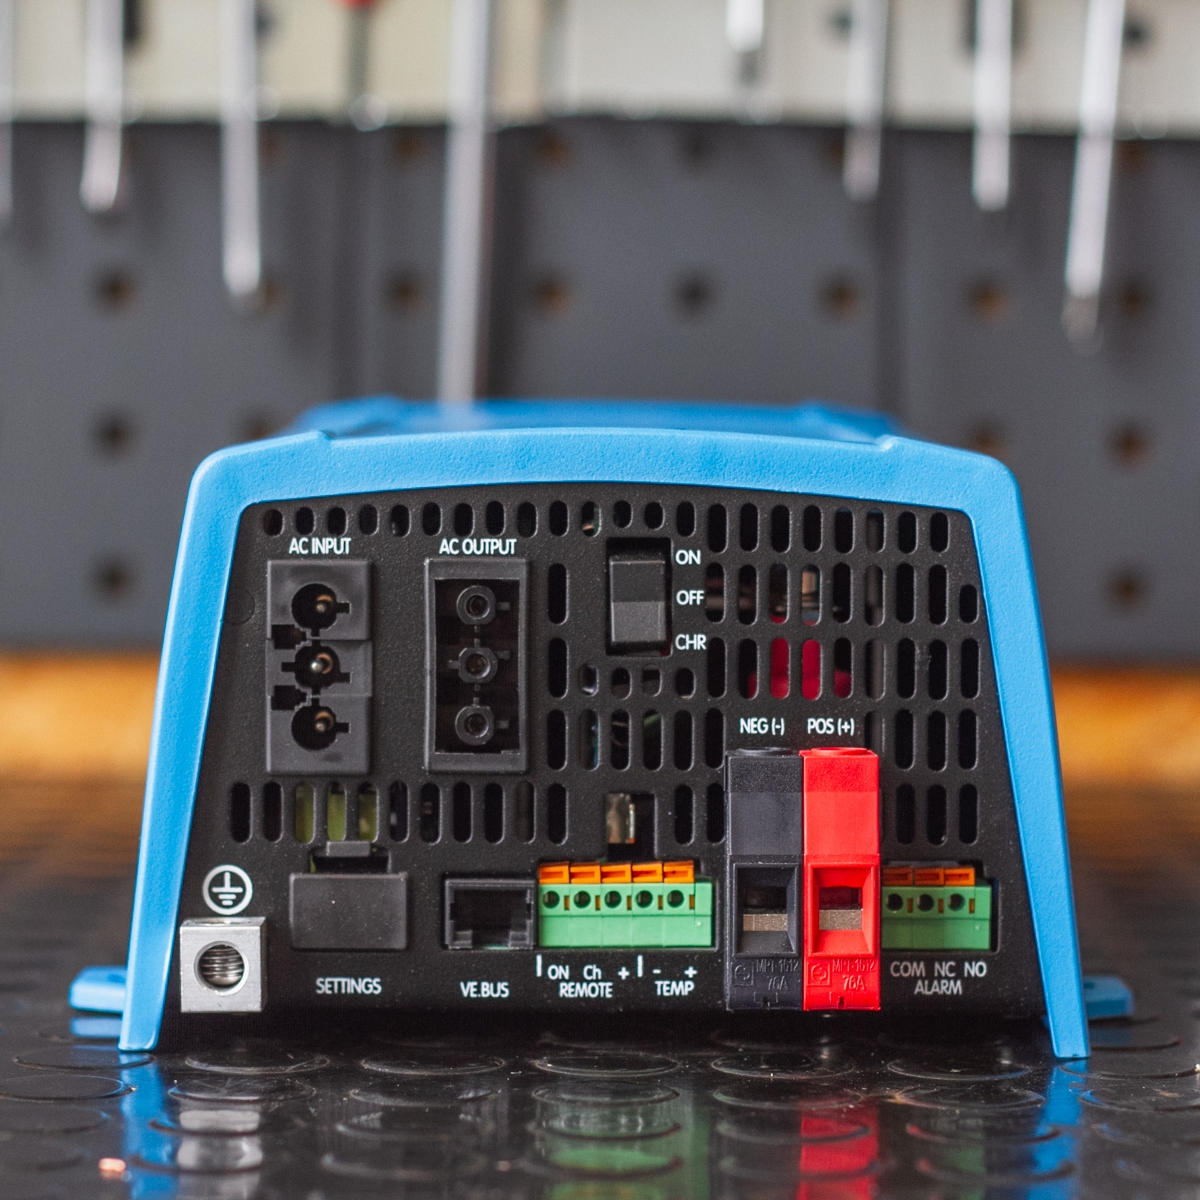 The blue electronic device, the Victron MultiPlus 500VA 12V Inverter/Charger, features various ports and switches labeled AC input, AC output, ON, OFF, NEG, POS, and settings.